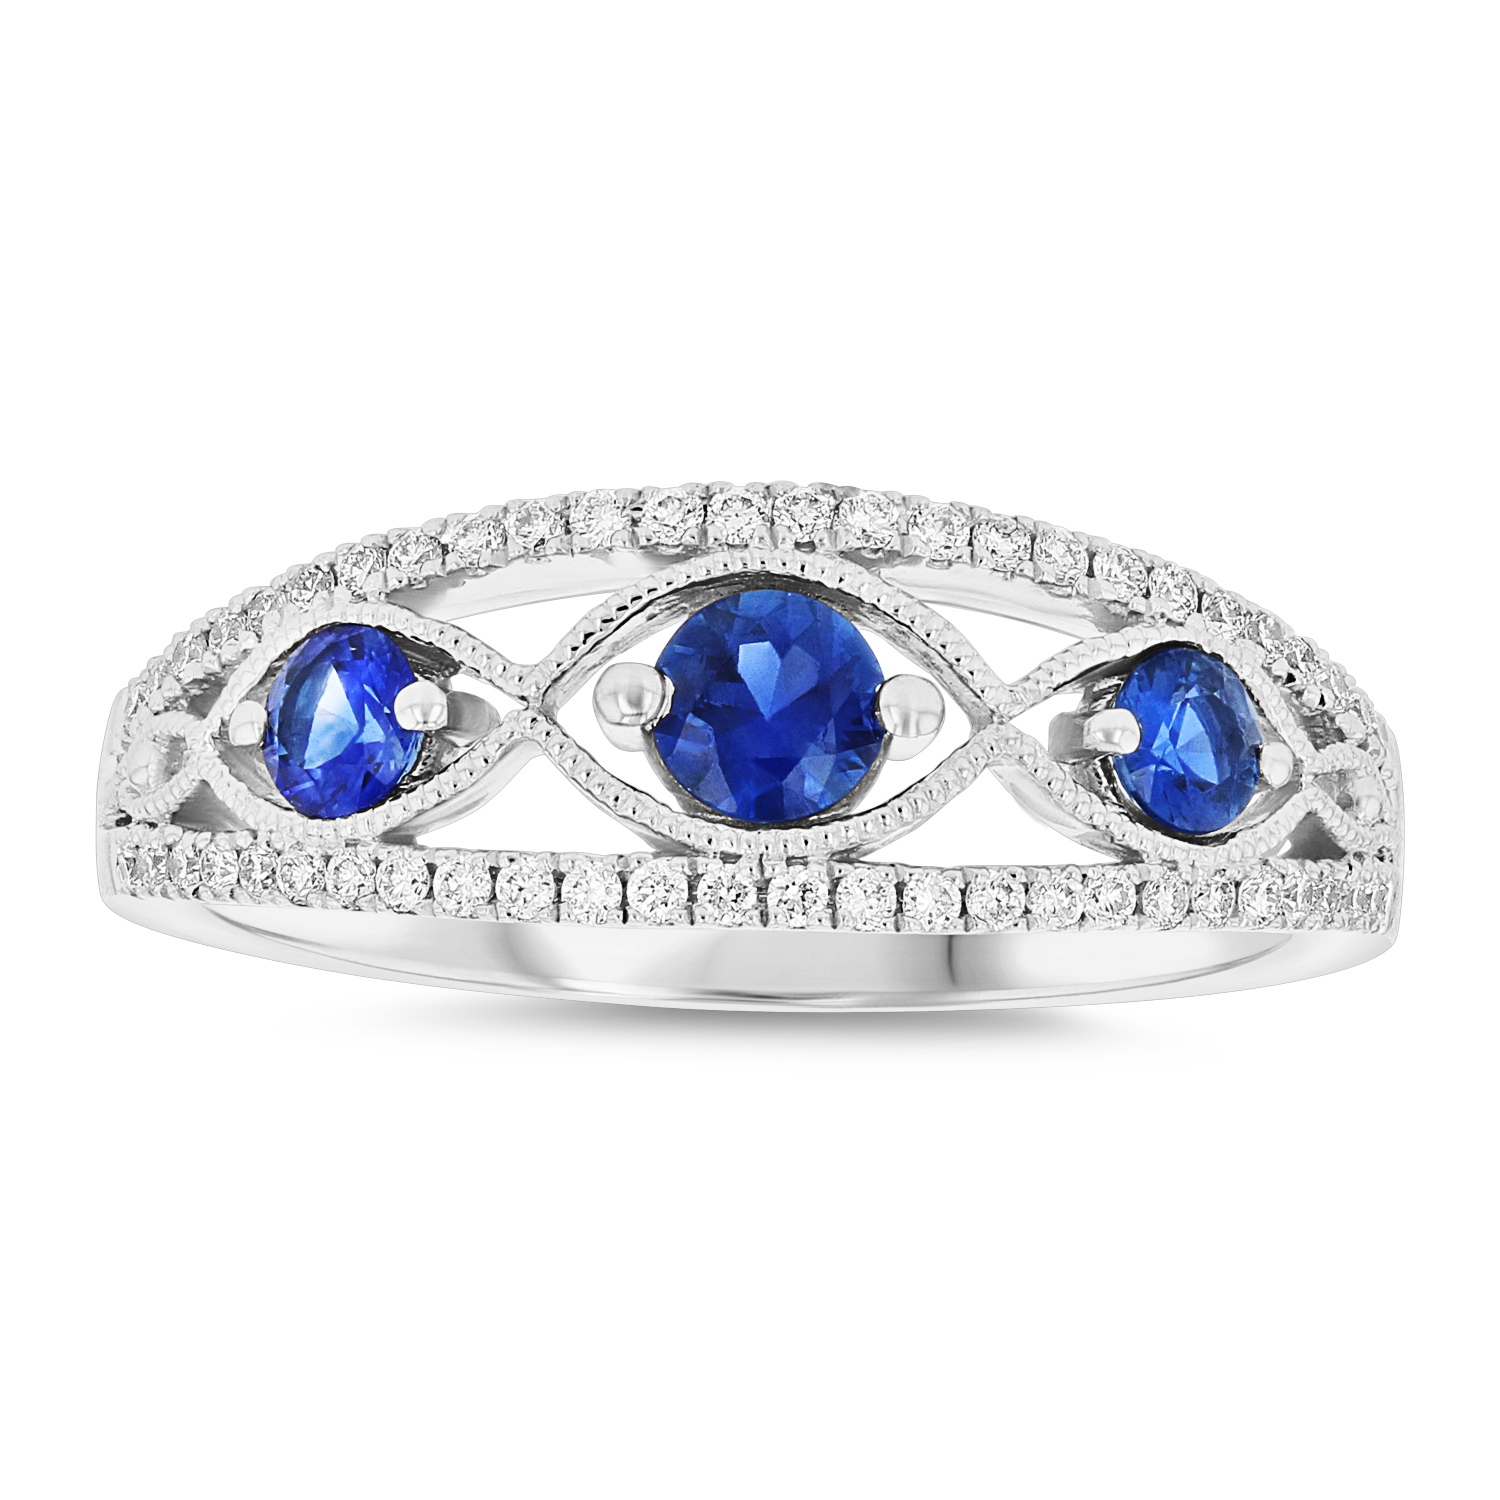 View Diamond and sapphire Ring in 14k White gold